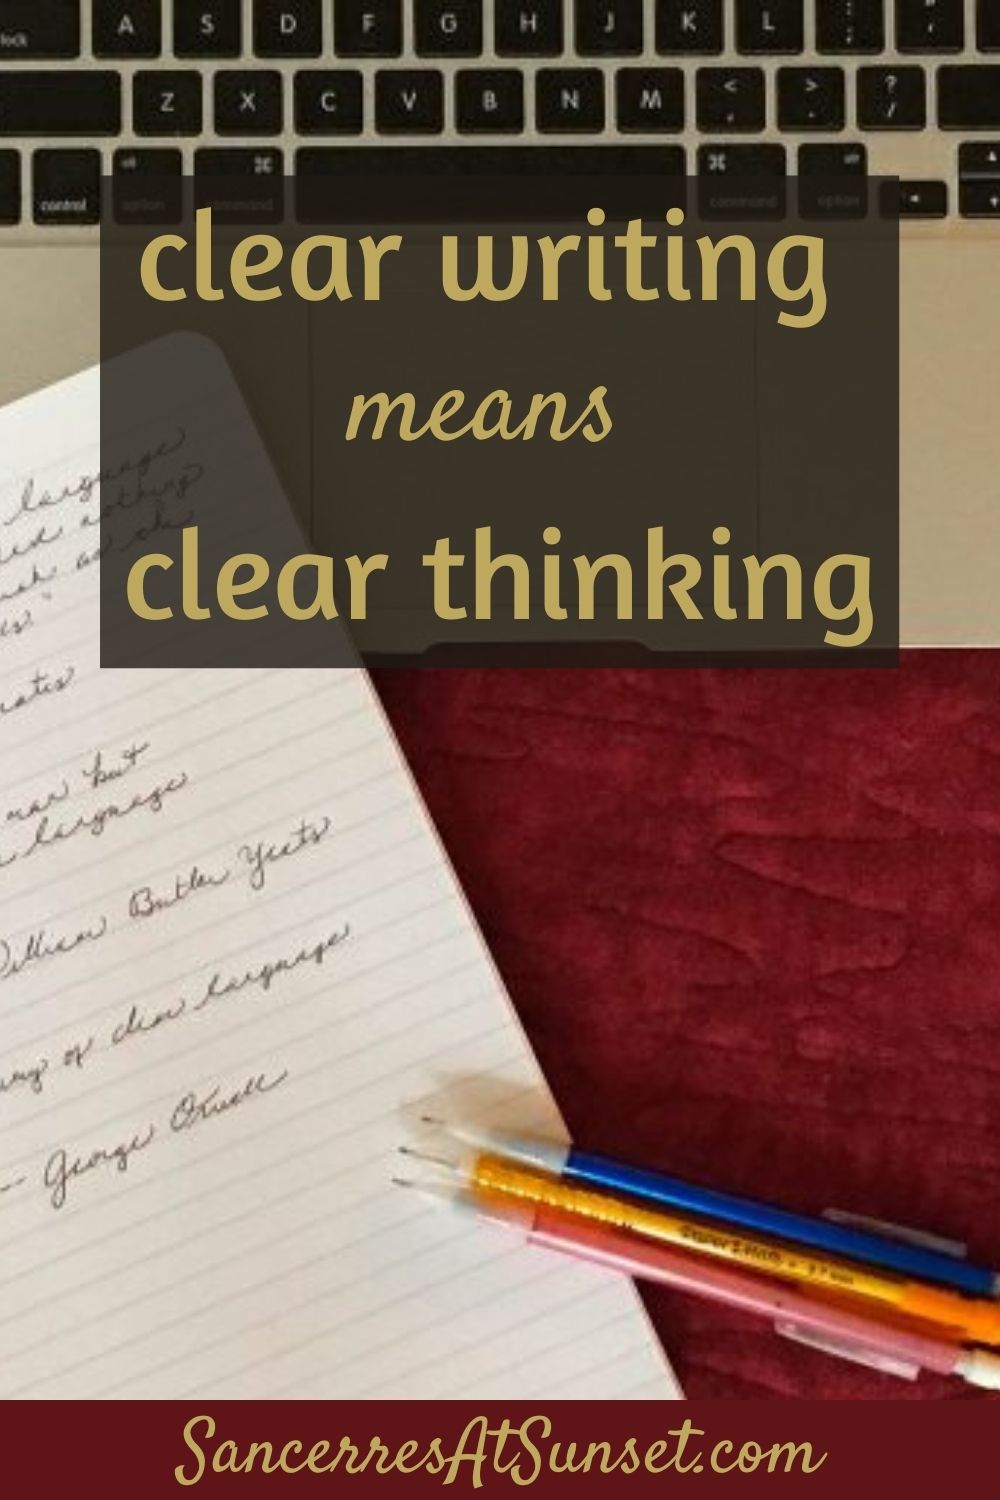 Thinking Clearly, Writing Well